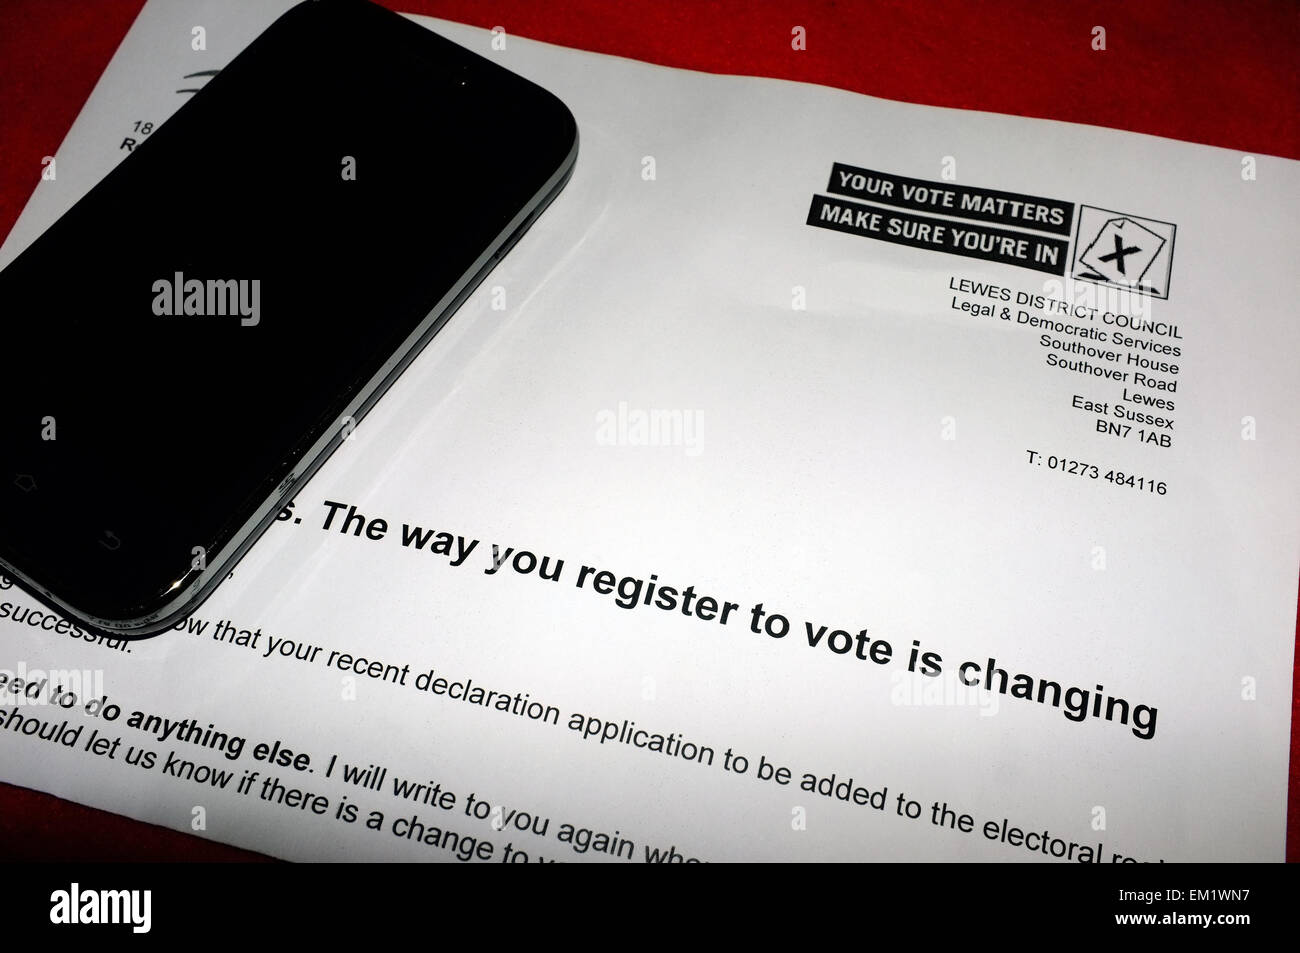 A smartphone laying on top of a voter registration form prior to the 2015 UK General Election. Stock Photo